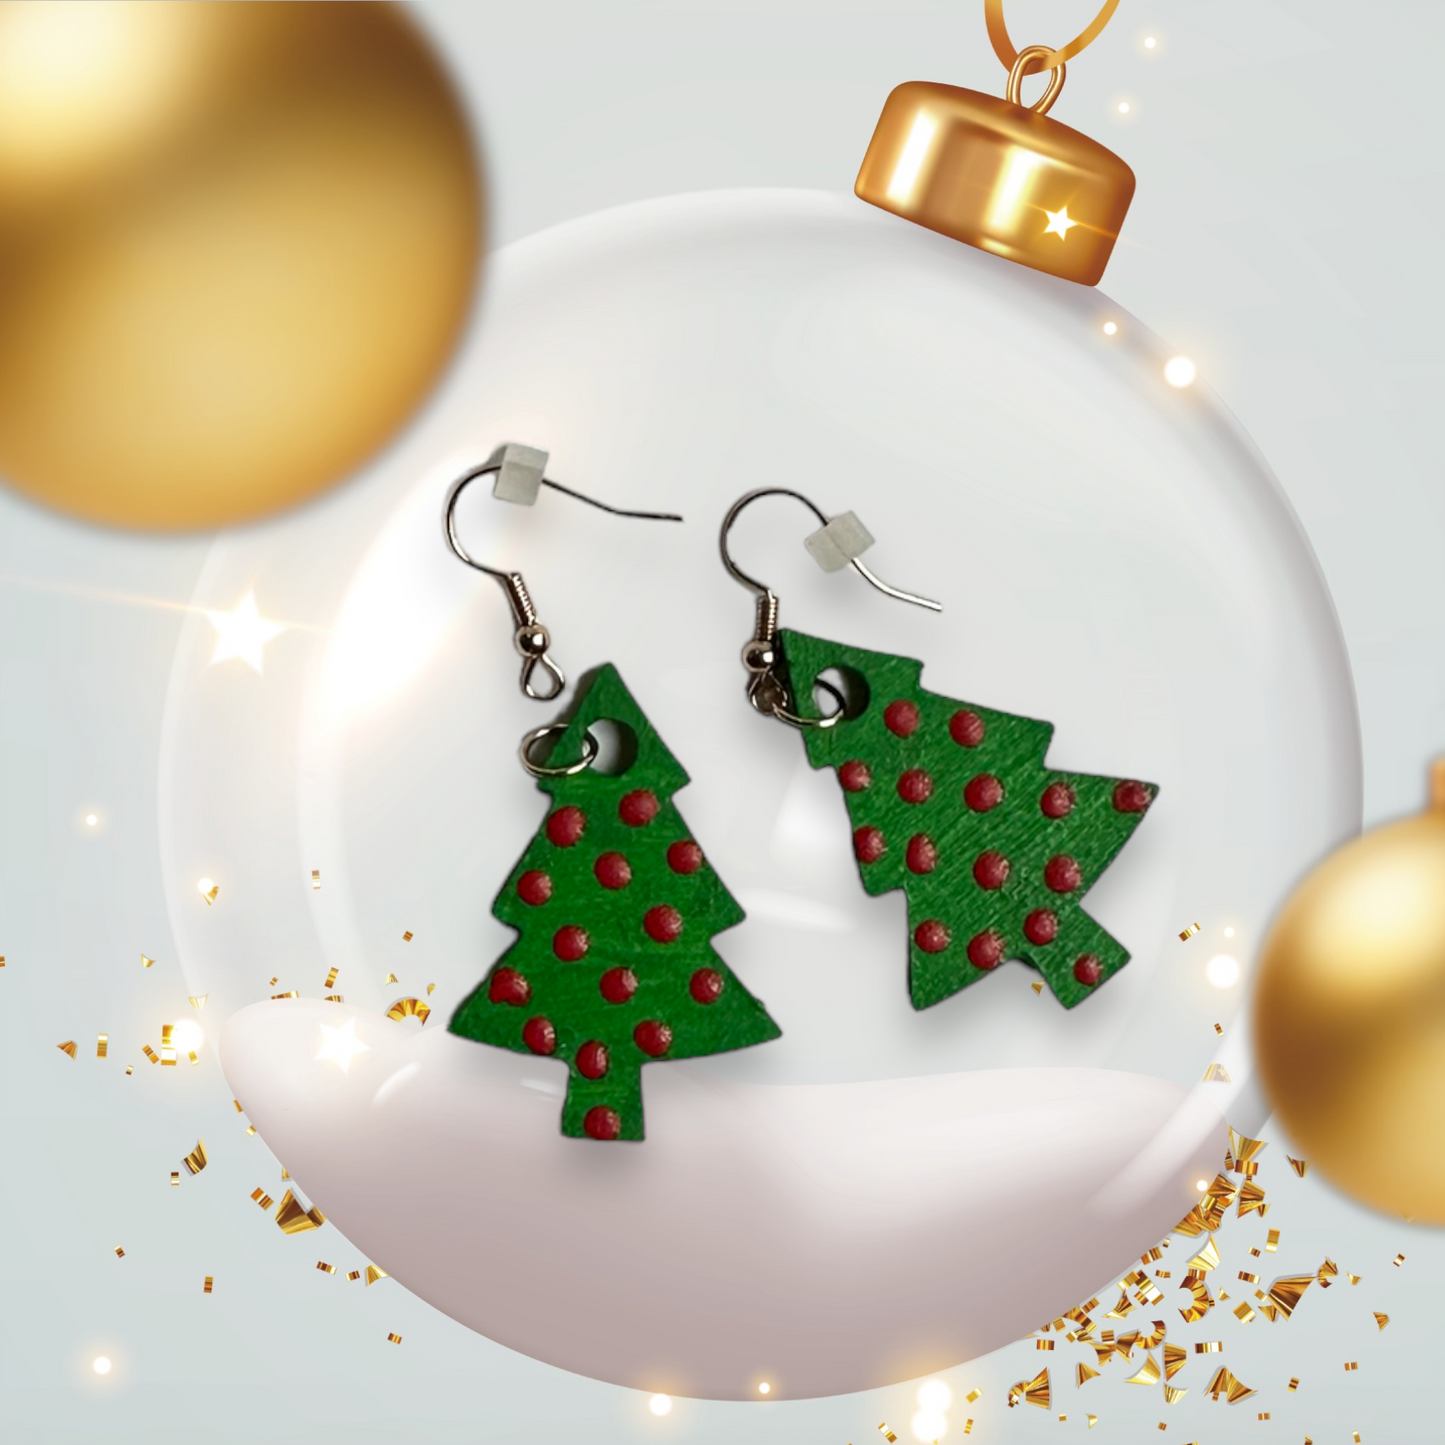 Handcrafted Red Polka Dot Christmas Tree Earrings